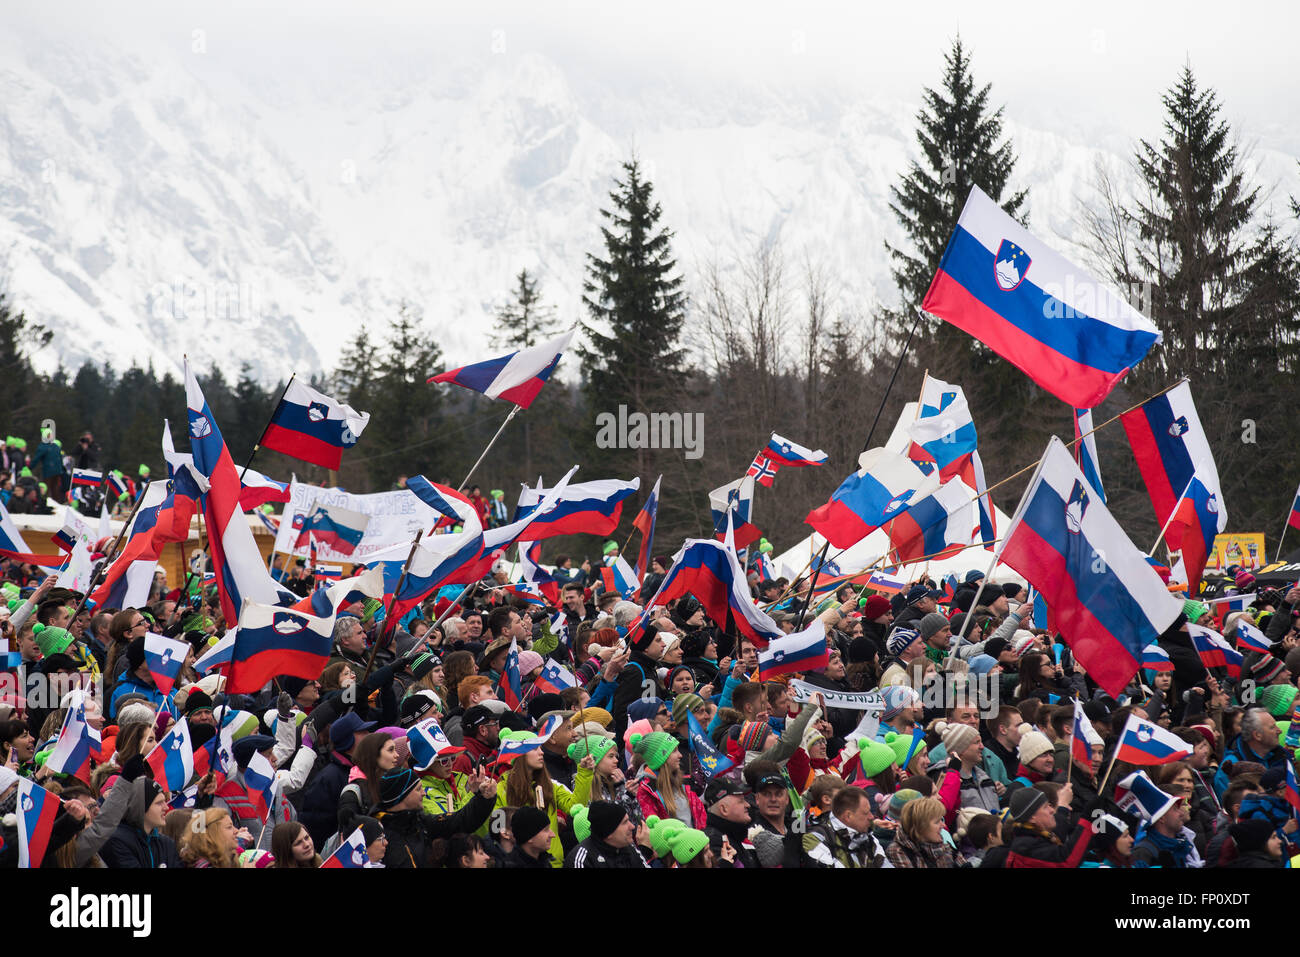 Planica, Slovenia. 17th Mar, 2016. Crowd of 20 000 spectators watching competition at the Planica FIS Ski Jumping World Cup final in Planica, Slovenia on March 17, 2016. © Rok Rakun/Pacific Press/Alamy Live News Stock Photo